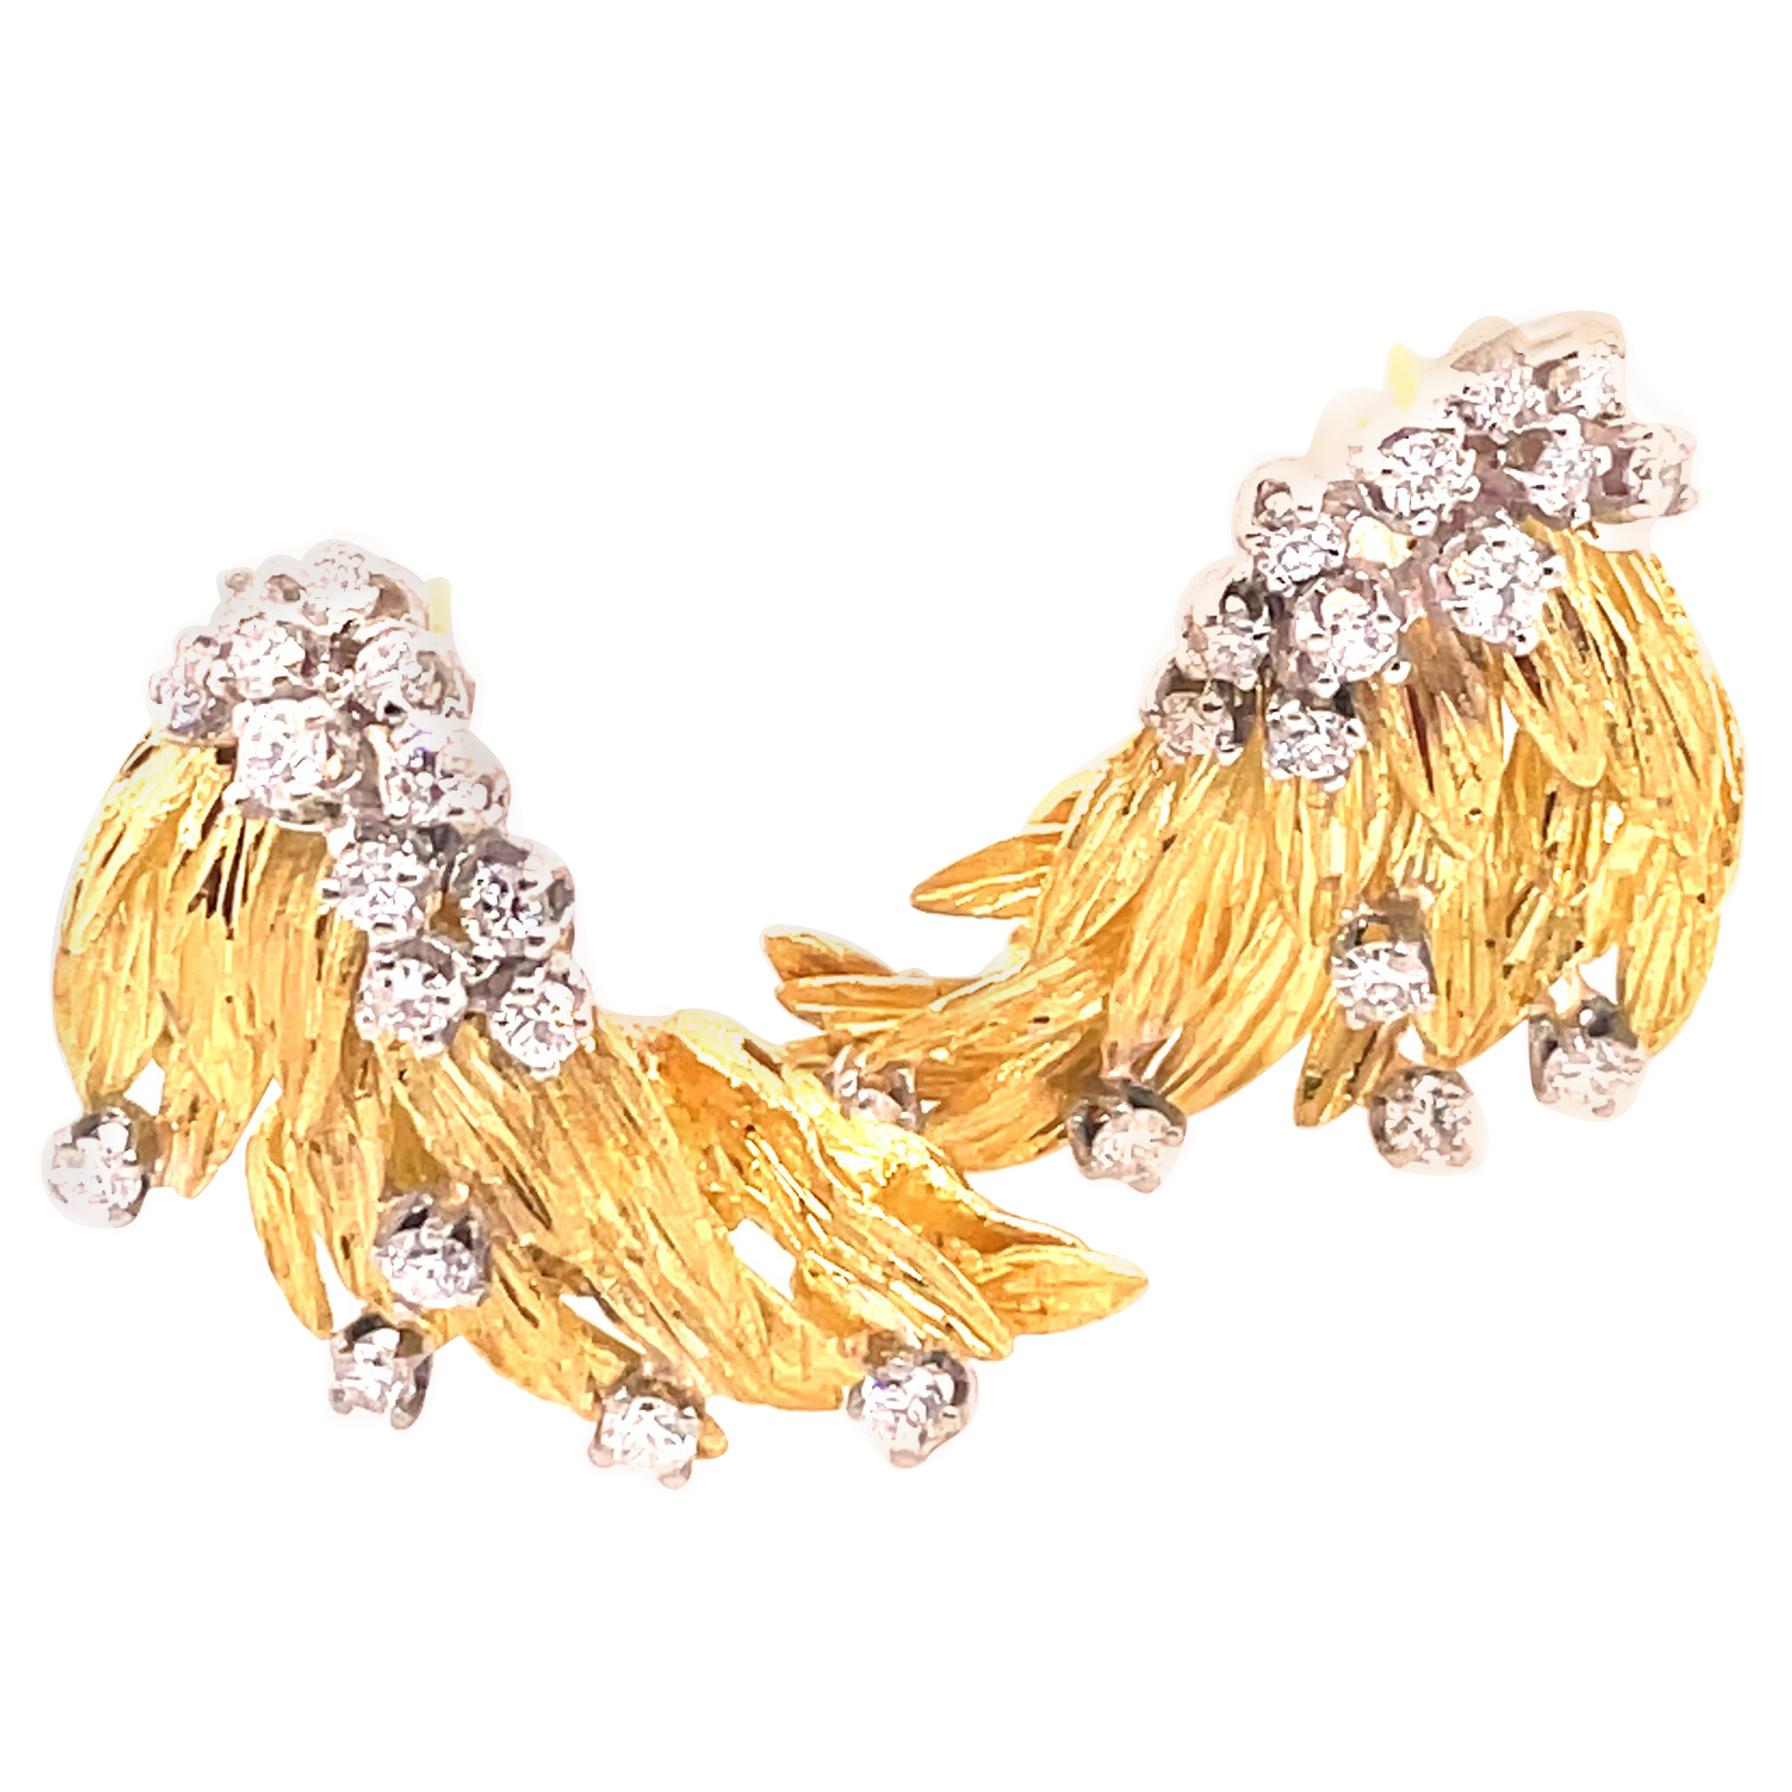 18 Karat Yellow Gold Flame Earrings with Diamond Accents